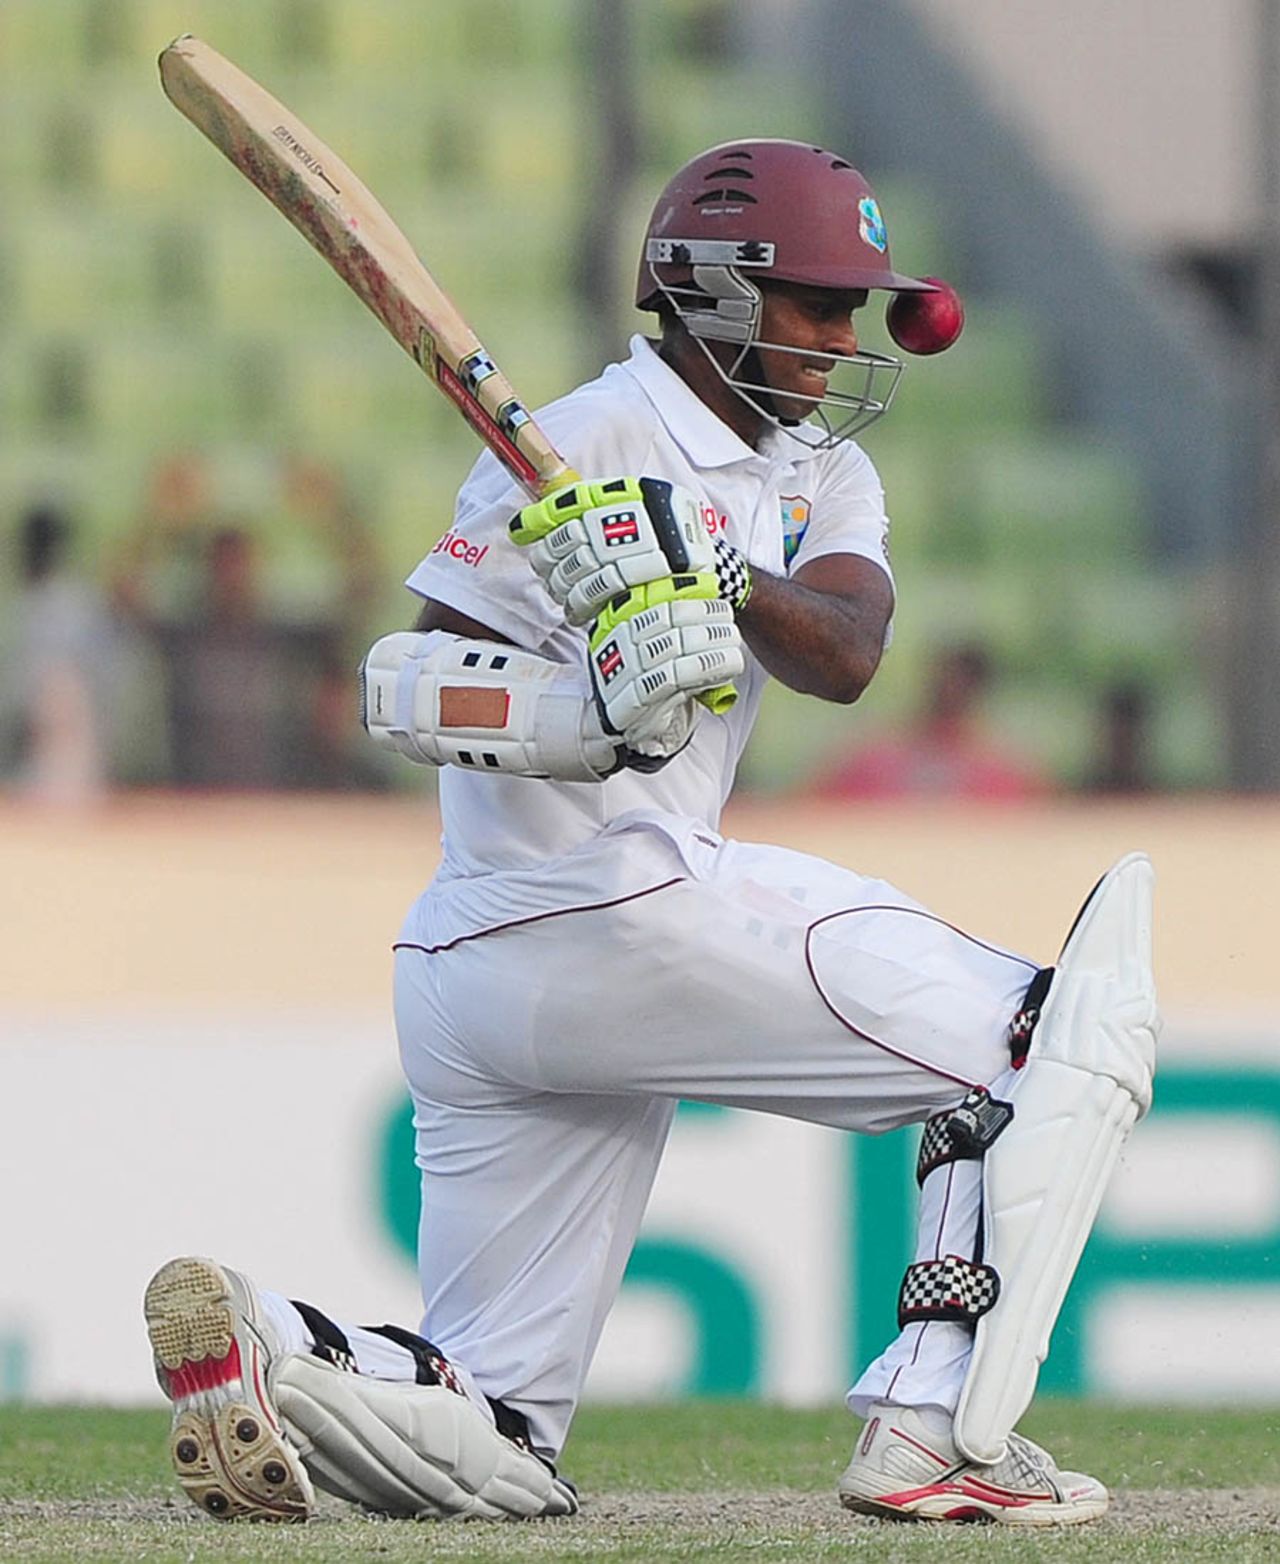 Shivnarine Chanderpaul attempts to play a shot, Bangladesh v West Indies, 1st Test, Mirpur, 1st day, November 13, 2012